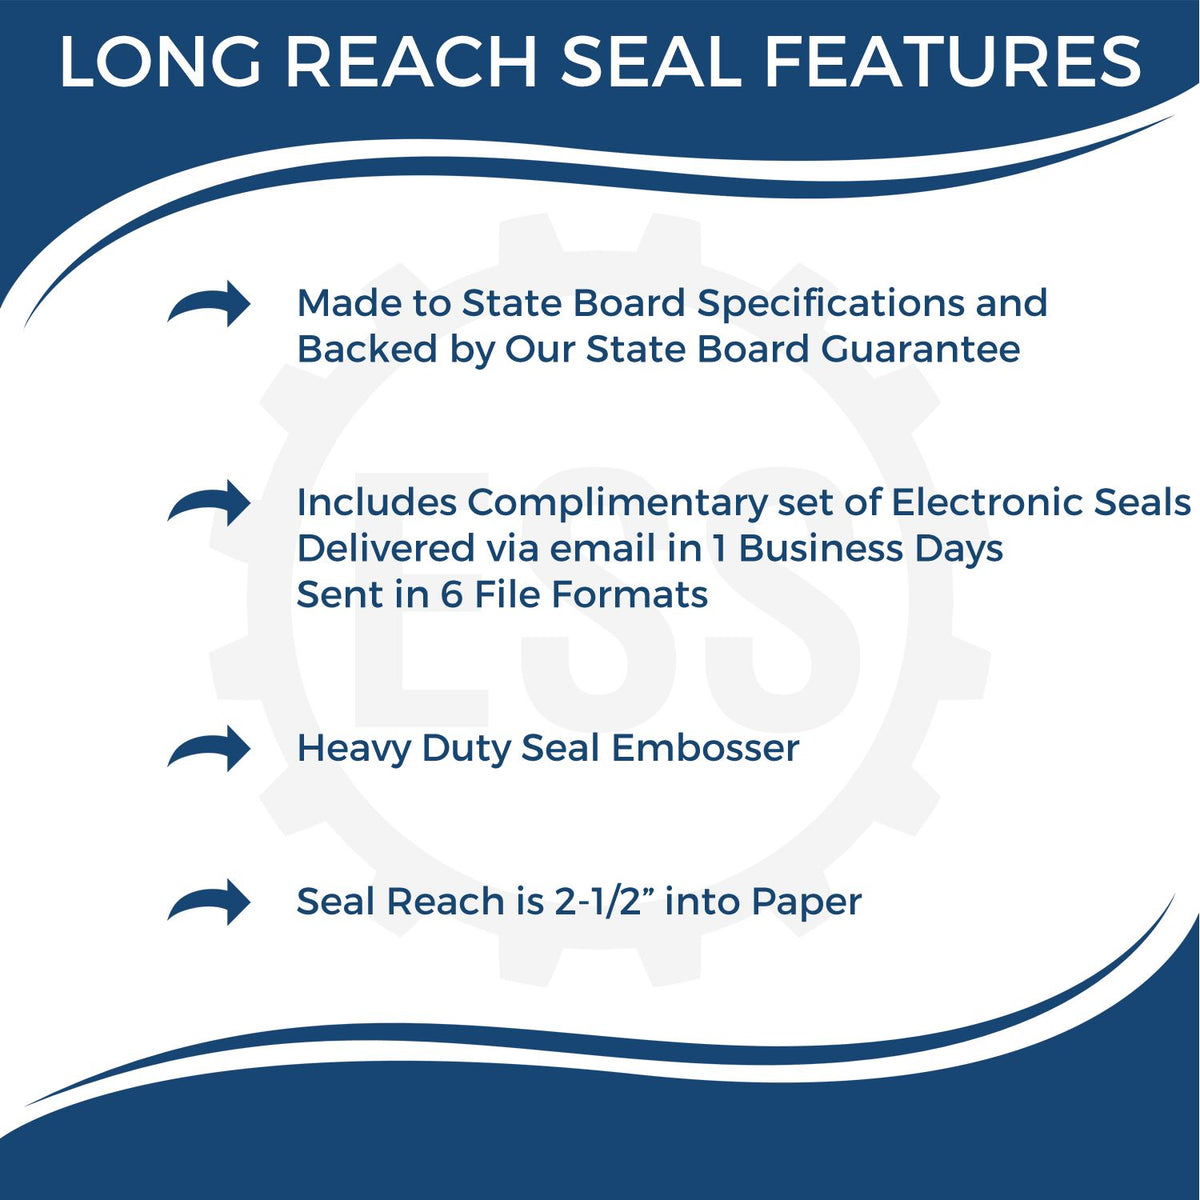 A picture of an infographic highlighting the selling points for the Long Reach Connecticut Geology Seal